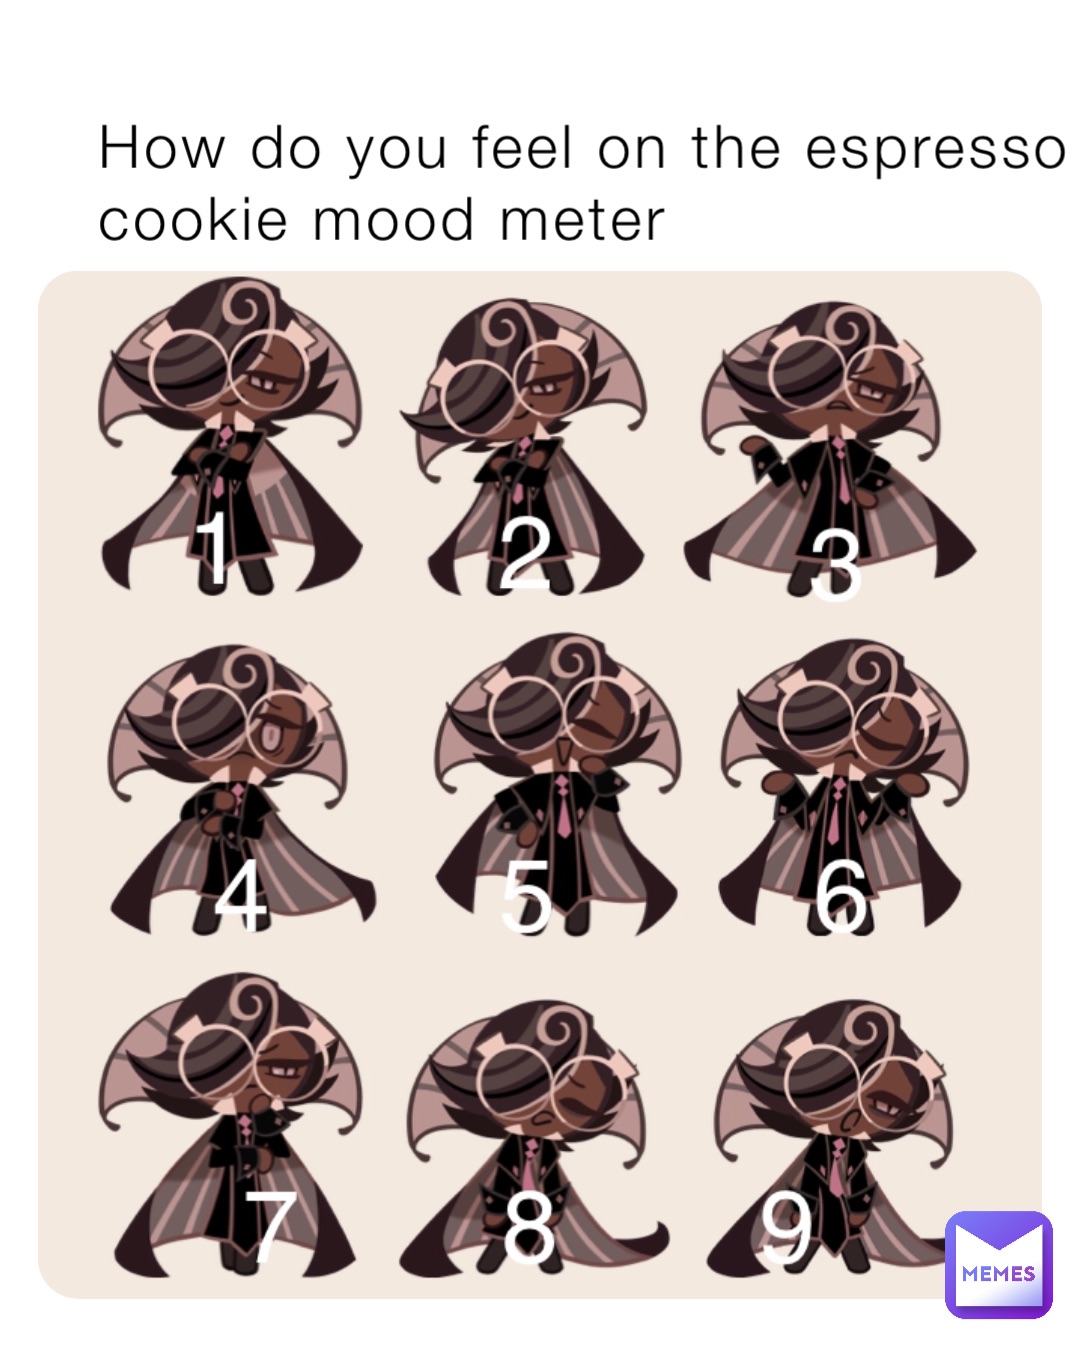 How do you feel on the espresso cookie mood meter